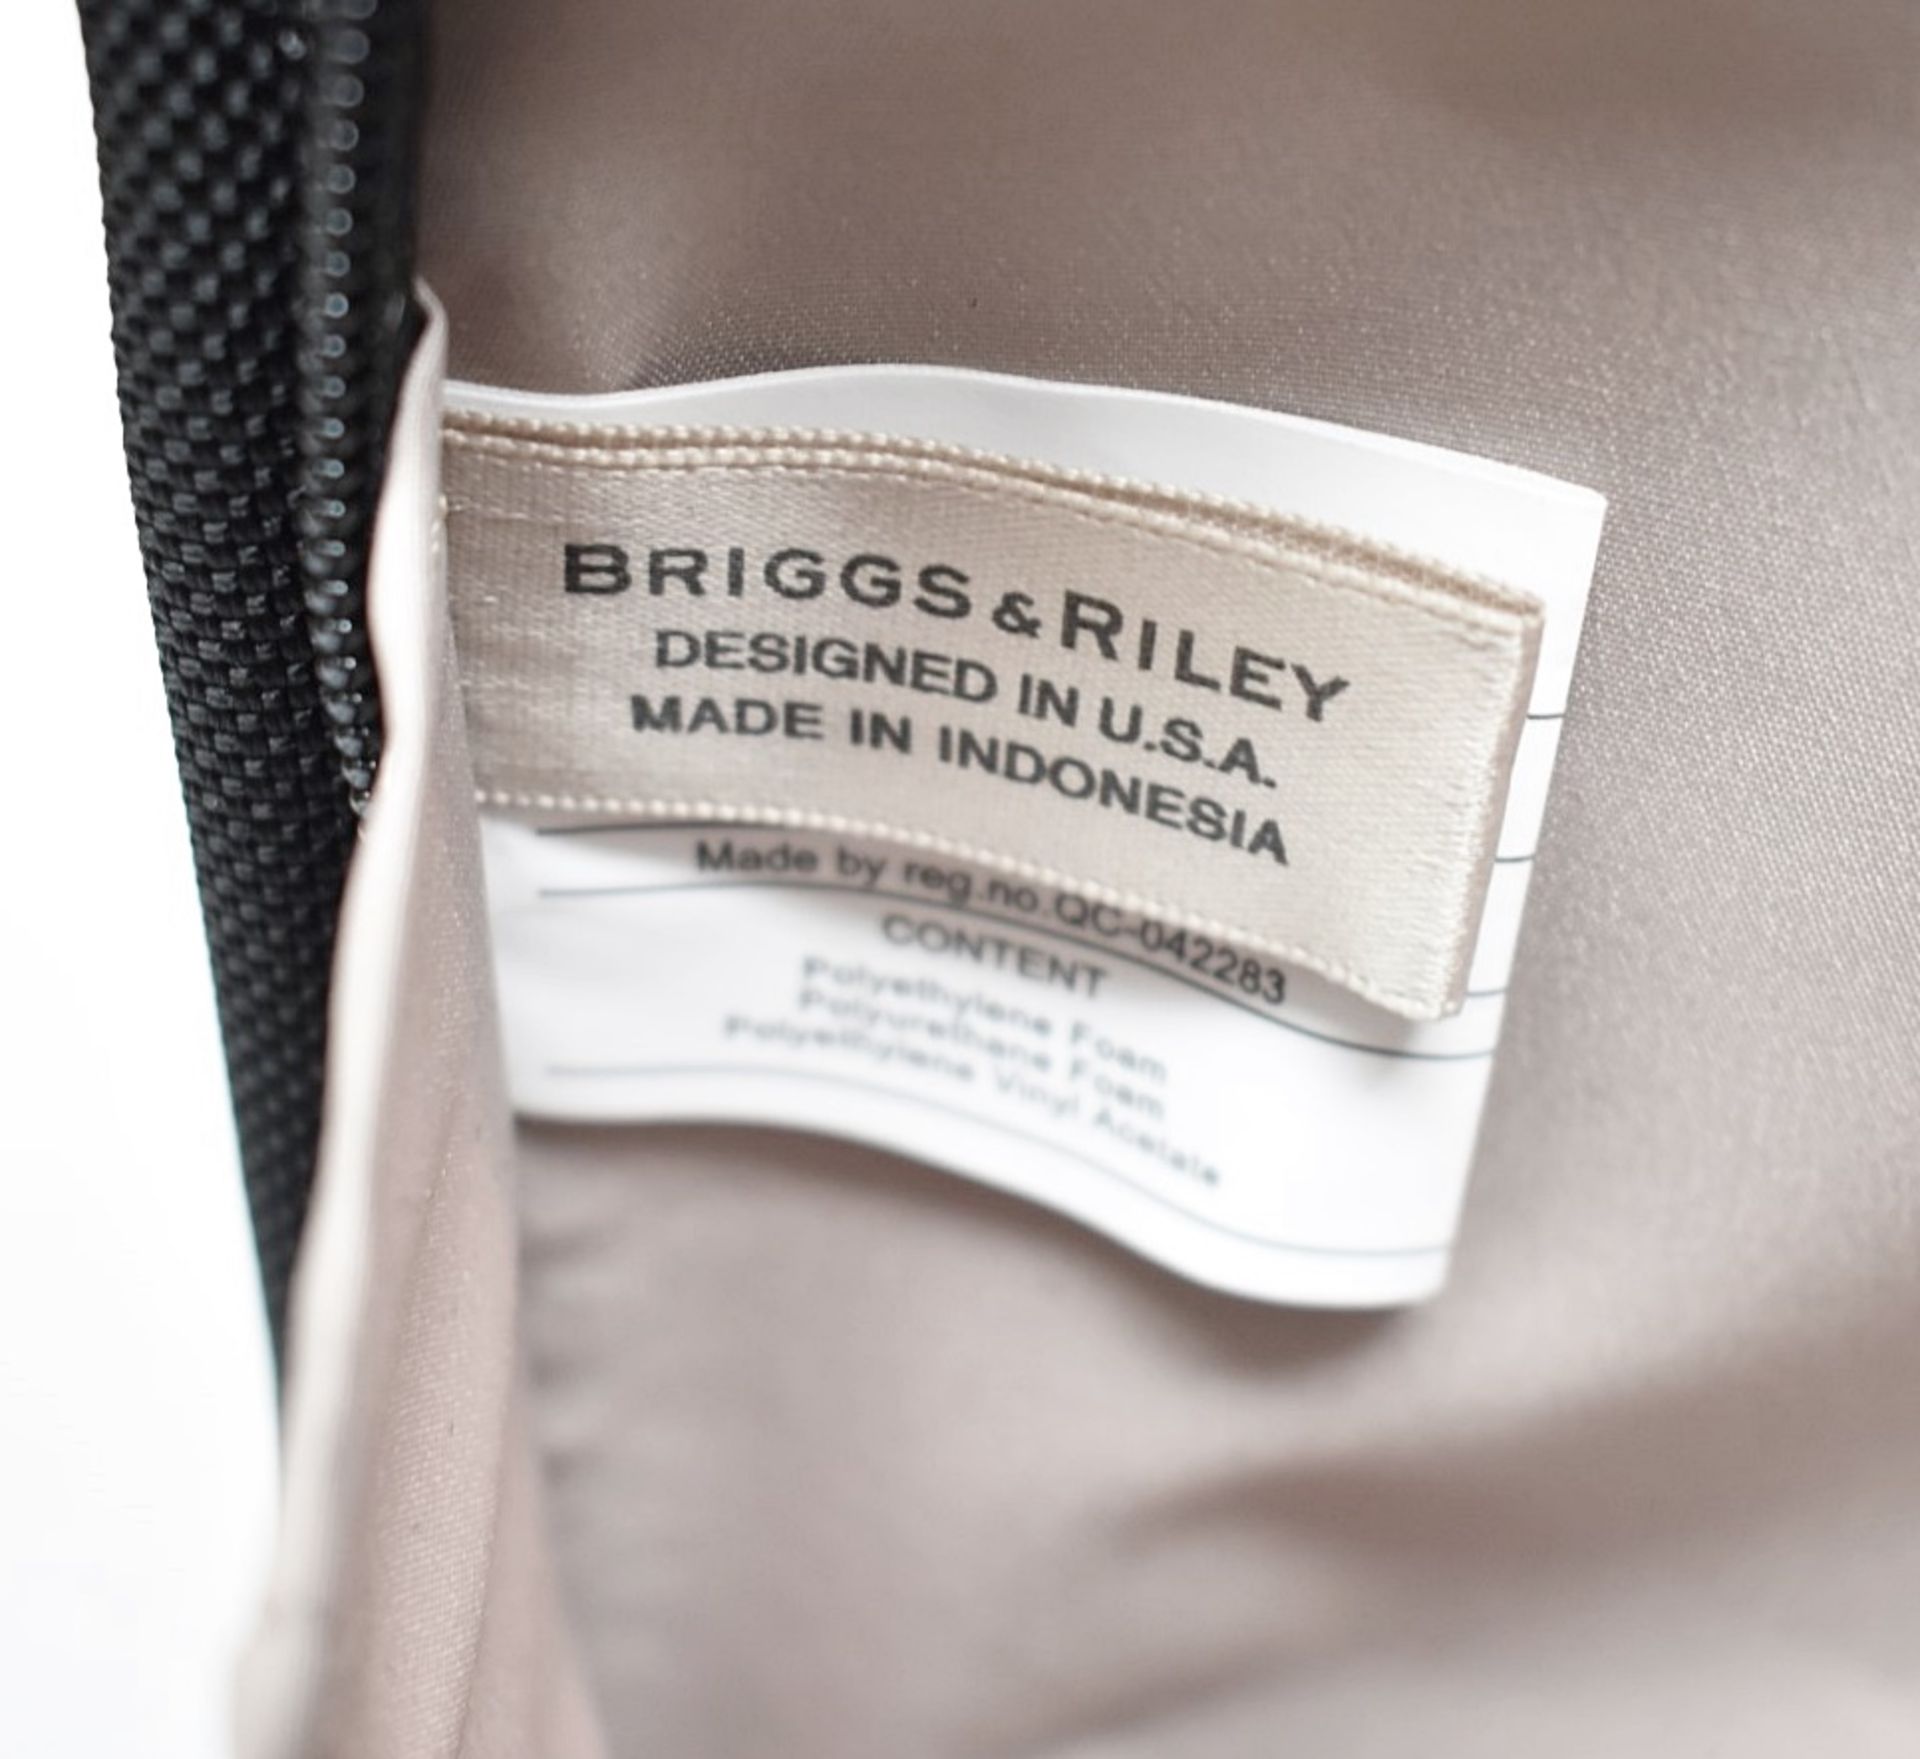 1 x BRIGGS & RILEY Wide Carry-On Baseline Garment Spinner Suitcase (40.5cm) - Original Price £629.00 - Image 11 of 24